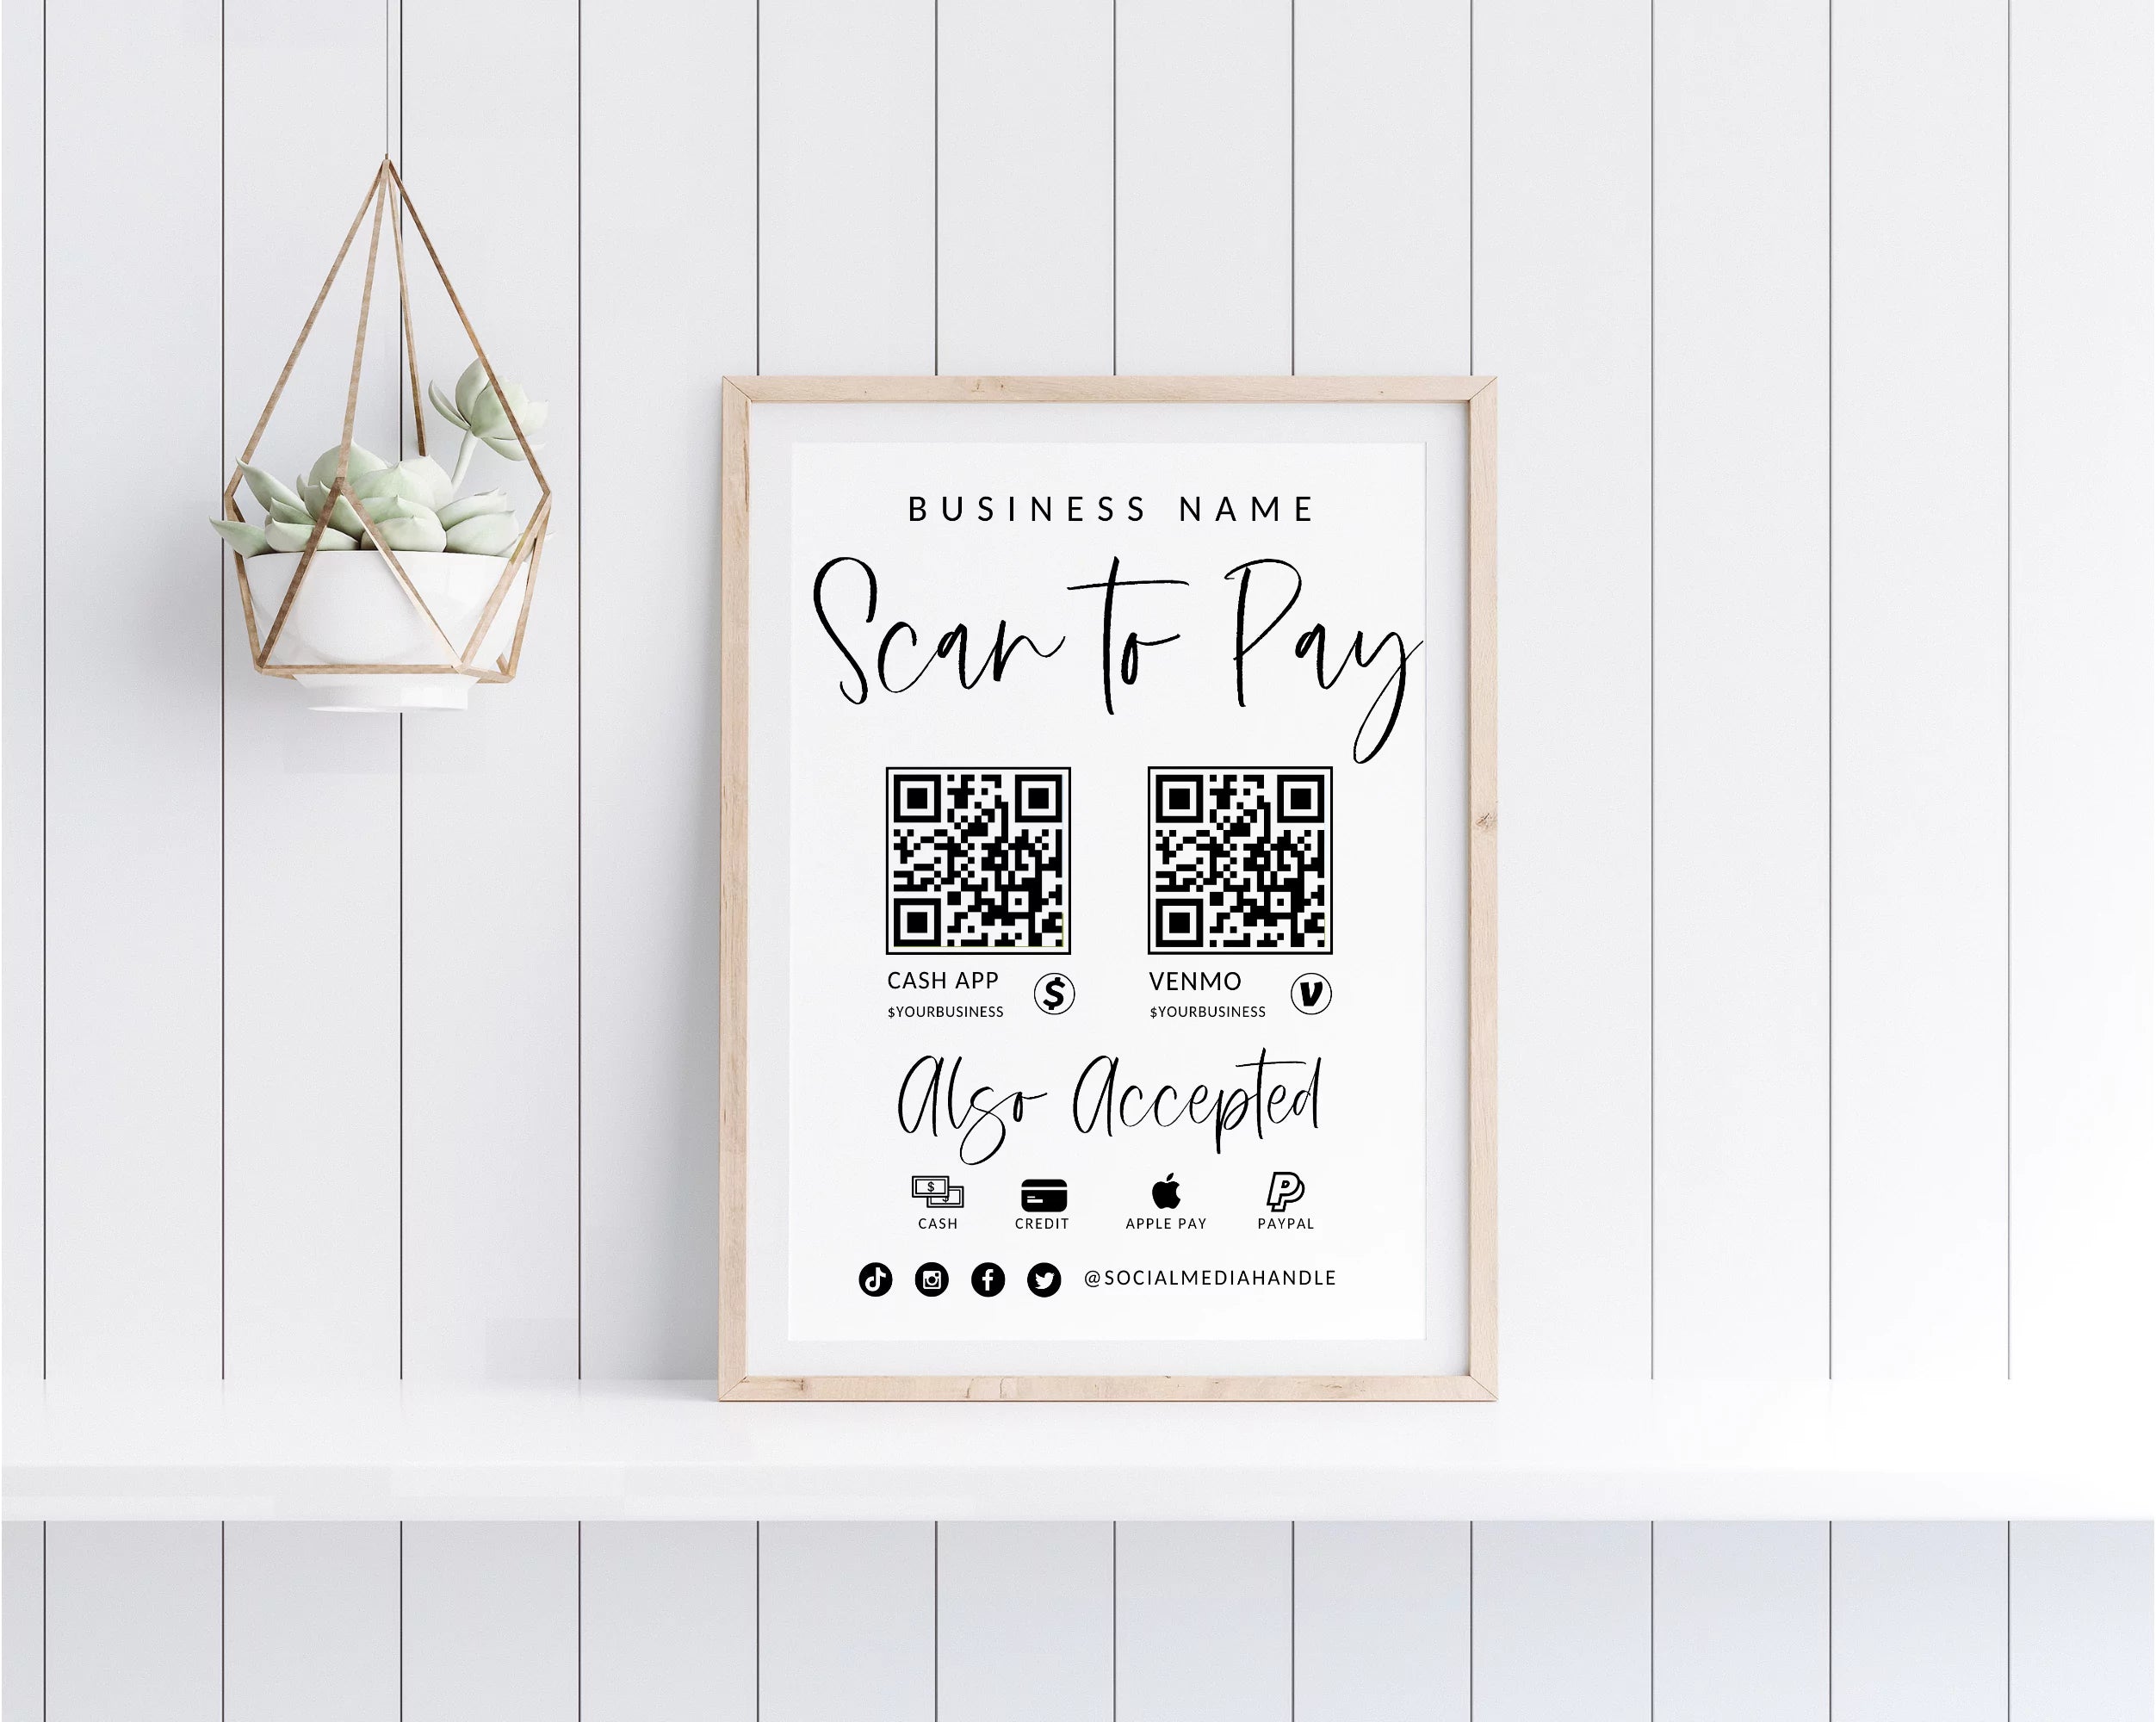 Boho Price List &amp; Scan to Pay Sign Canva Template | Gwen - Trendy Fox Studio